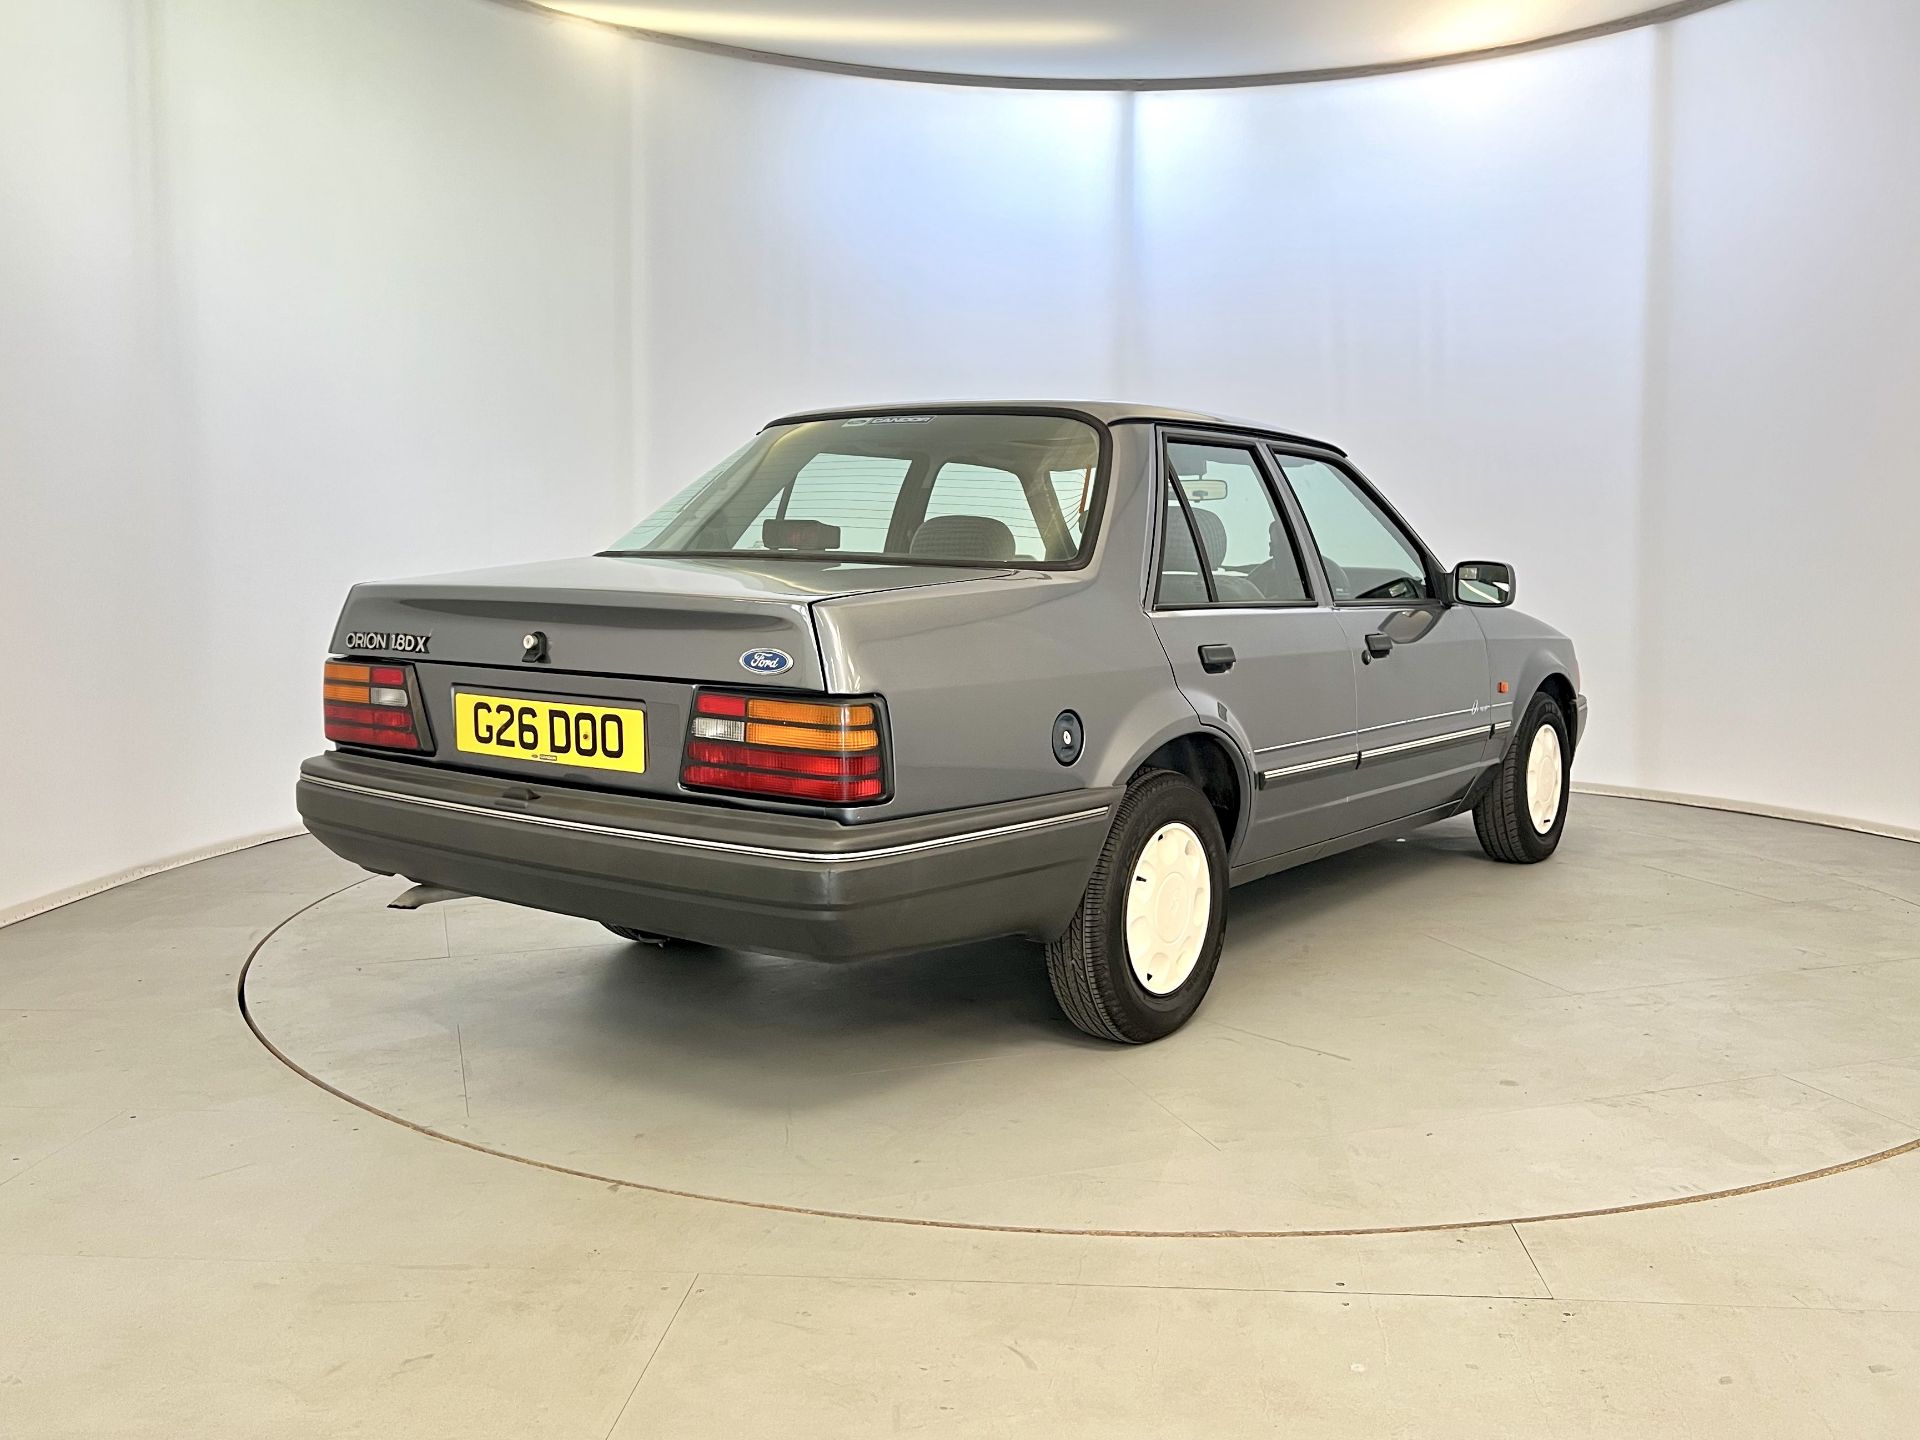 Ford Orion DX - Image 9 of 34